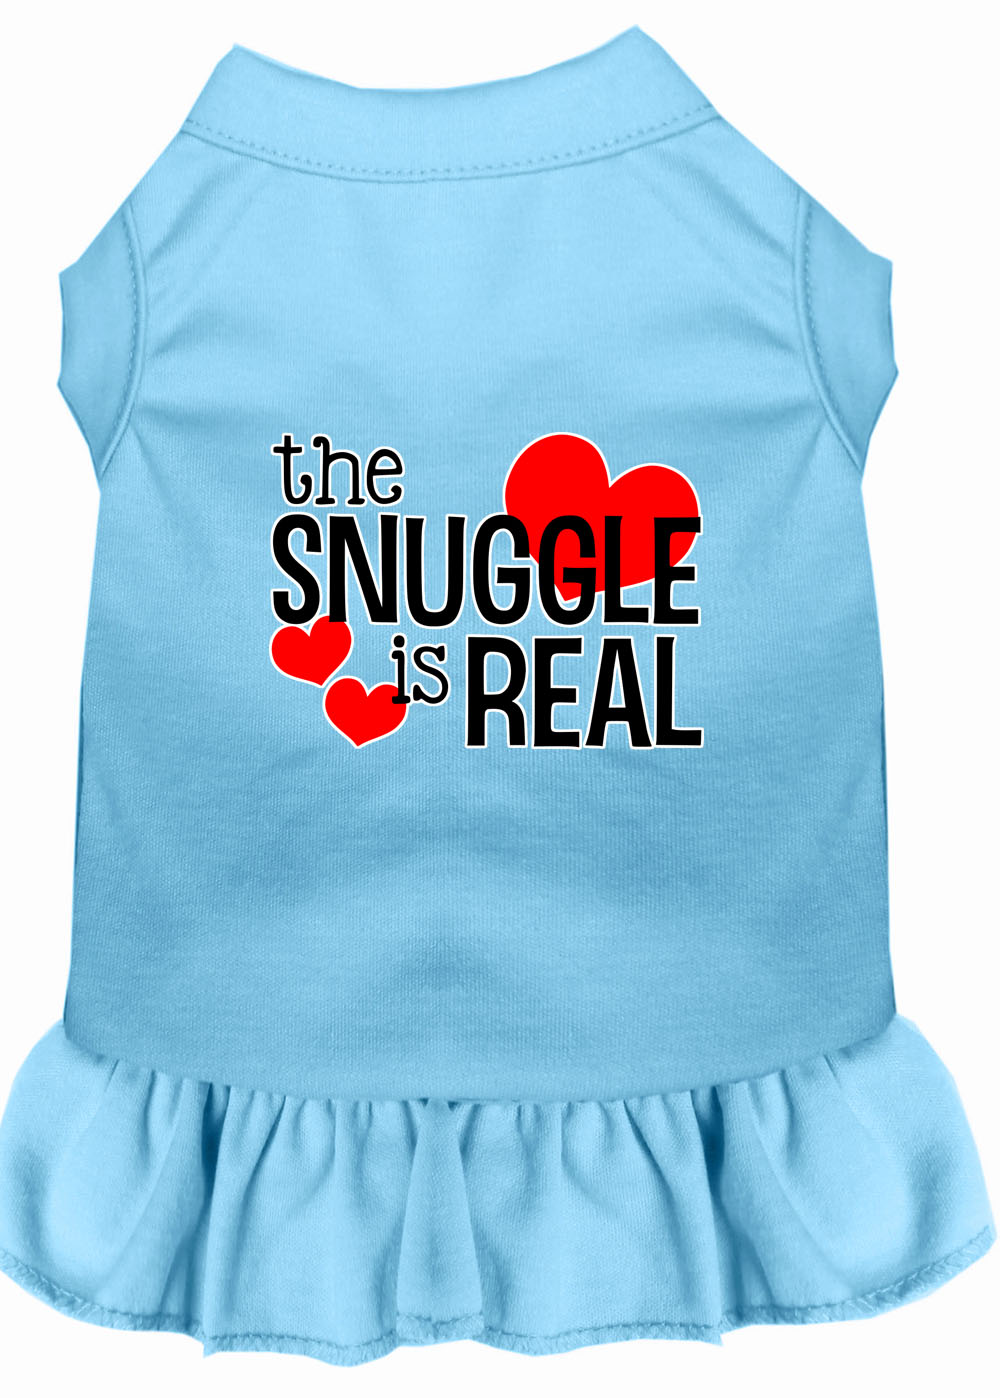 The Snuggle is Real Screen Print Dog Dress Baby Blue Med